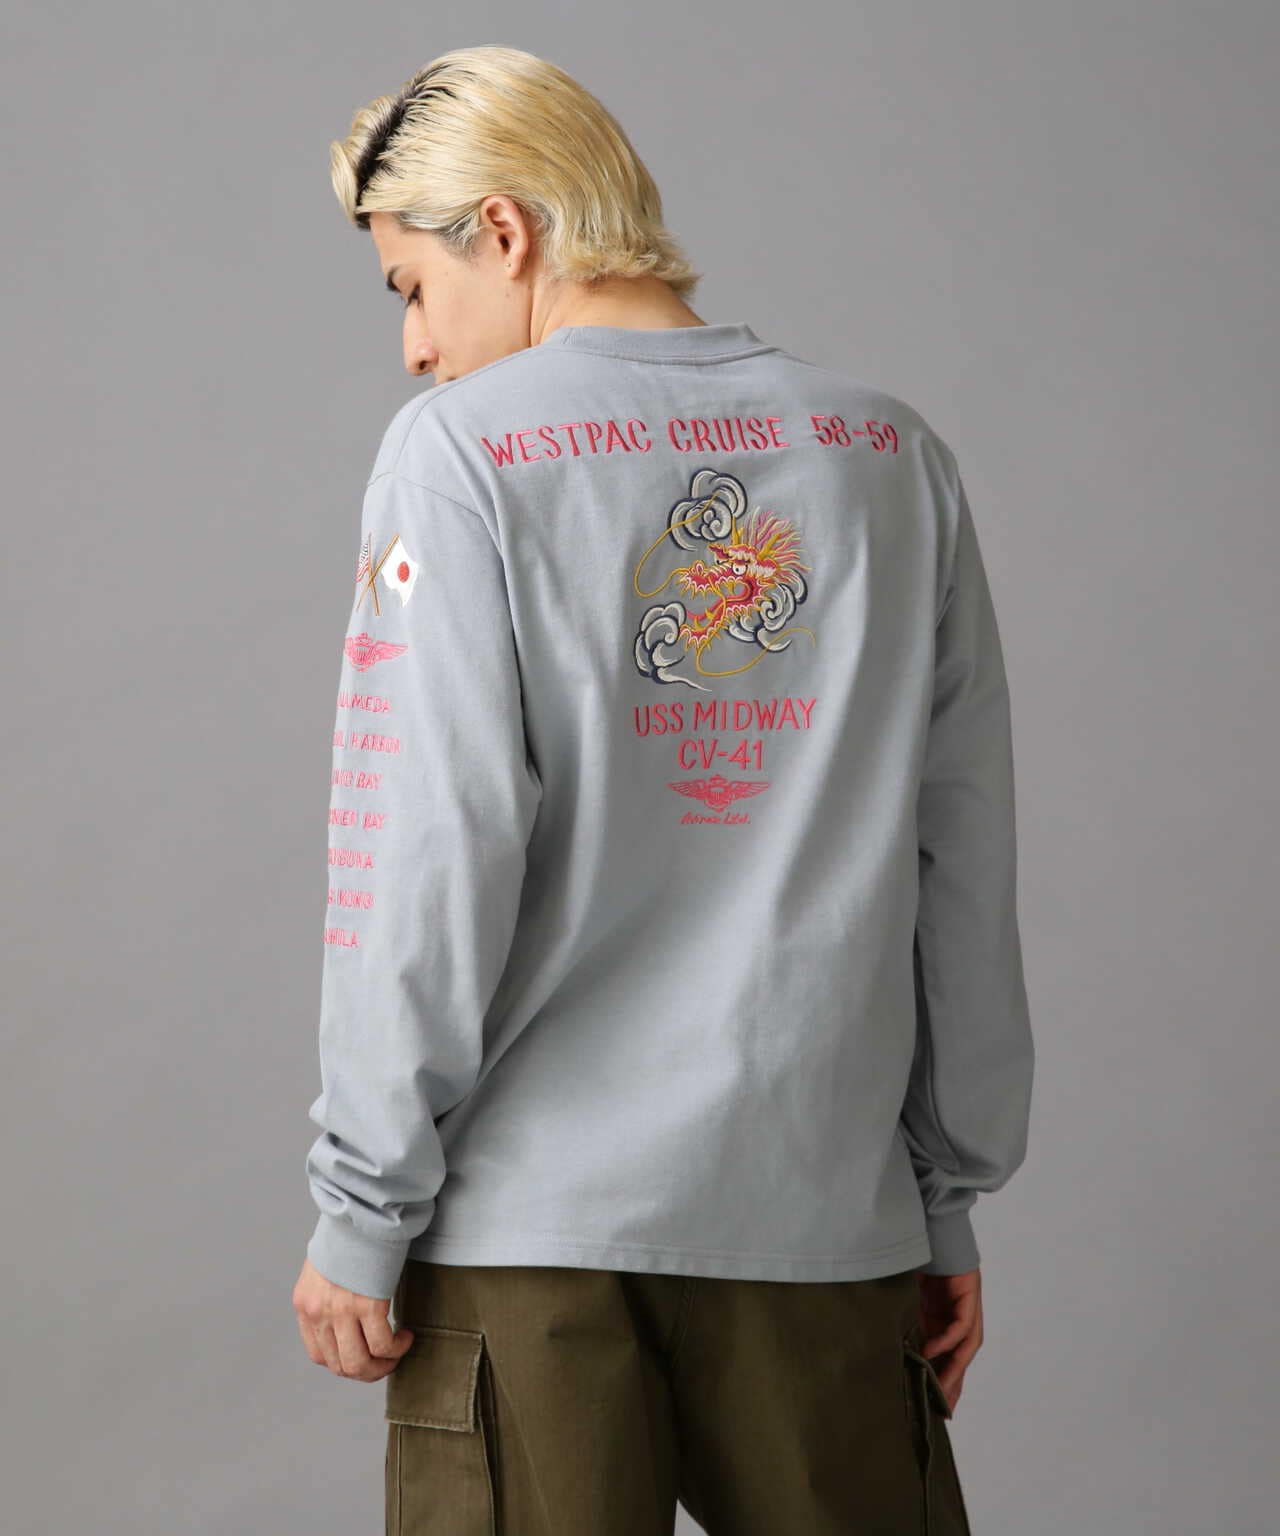 WEST PACIFIC CRUISE L/S T-SHIRT / ウェスト パシフィック クルーズ ...